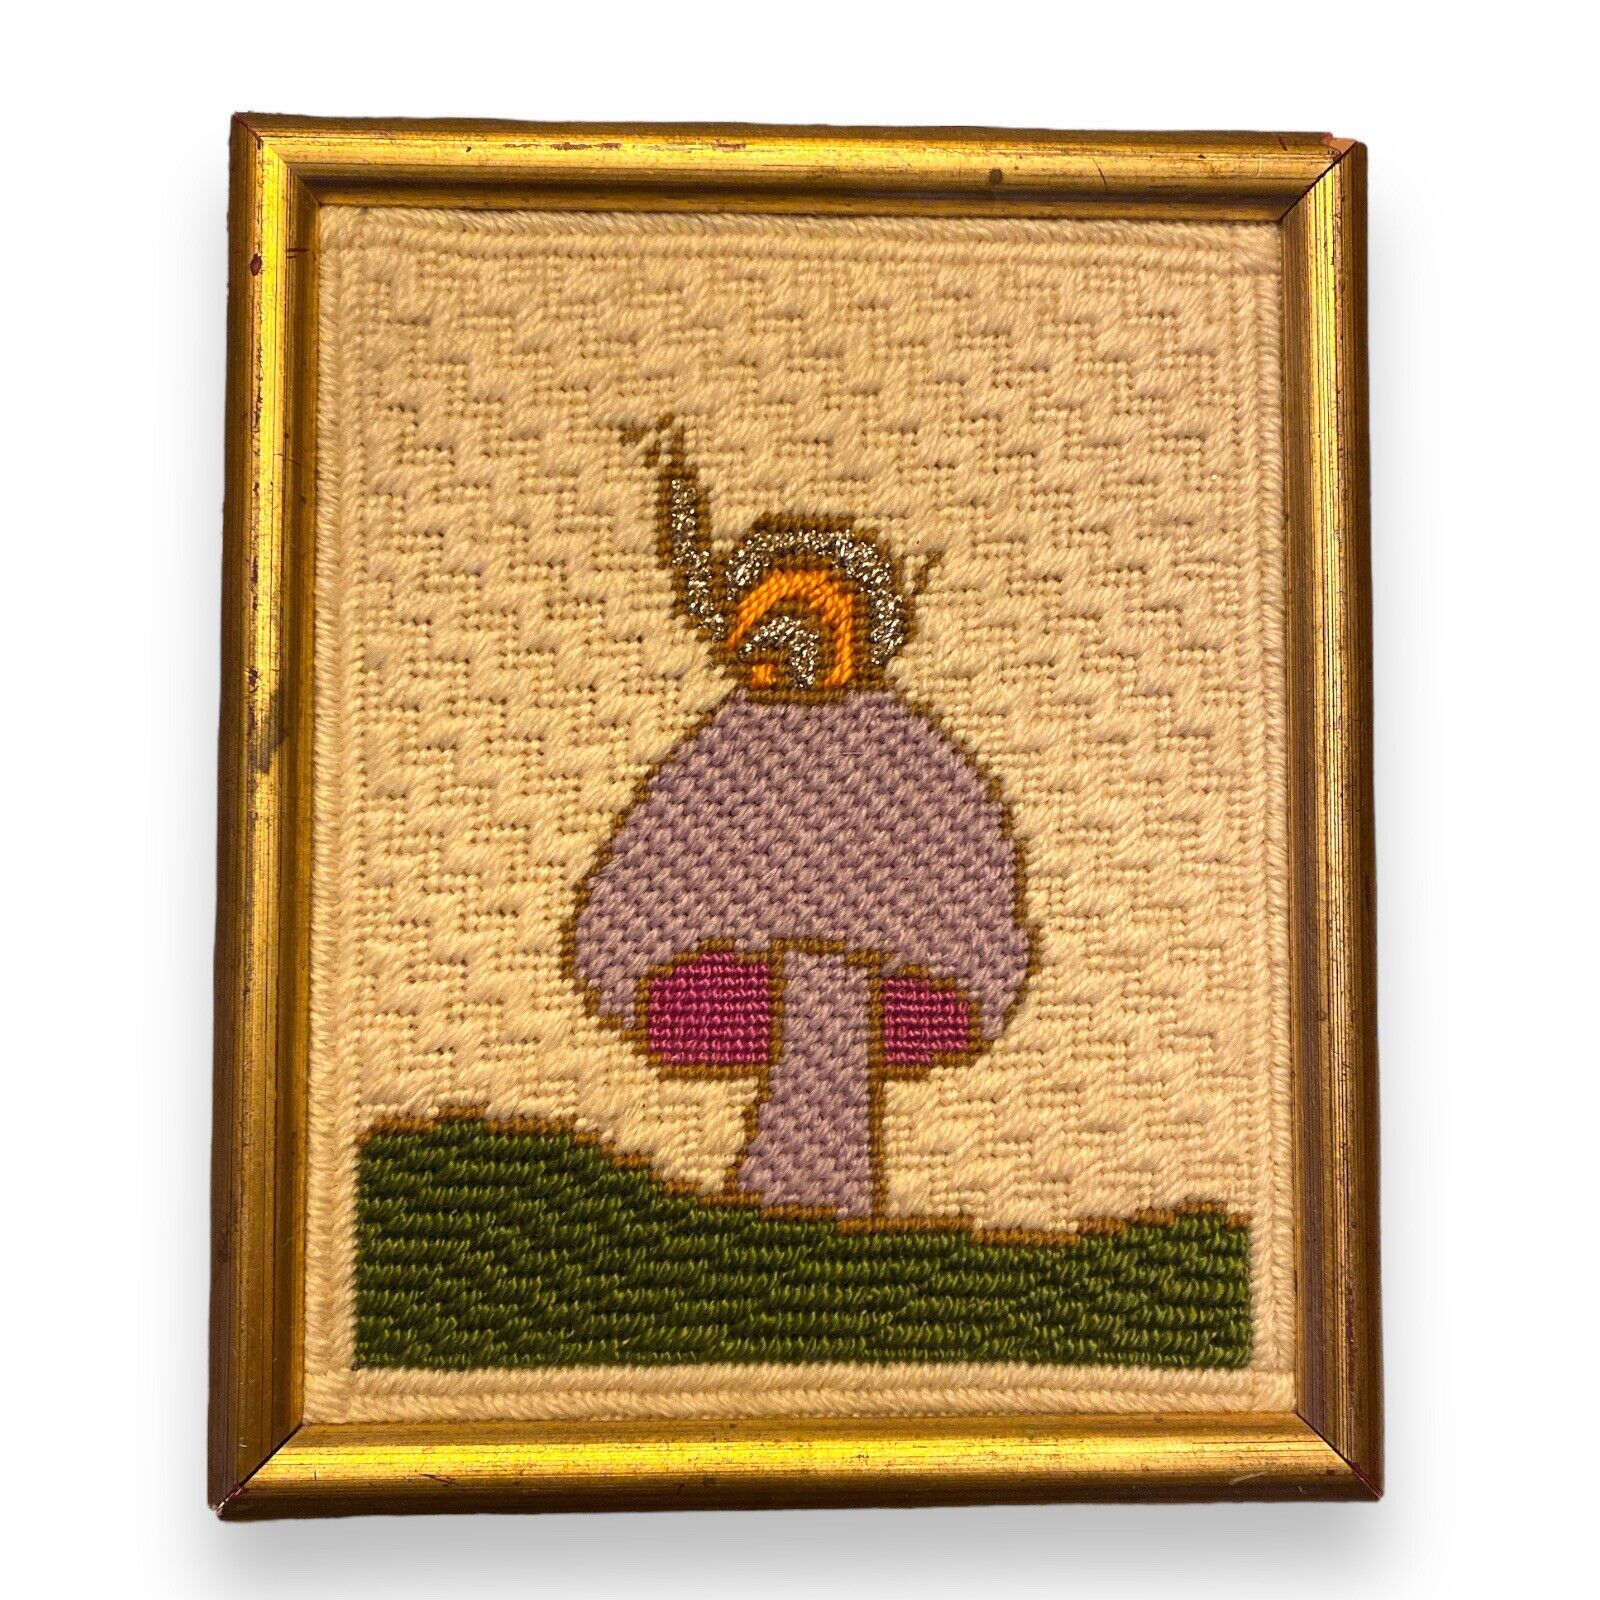 Vintage Embroidered Needle Point Snail On Mushroom Framed Wall Hanging Retro